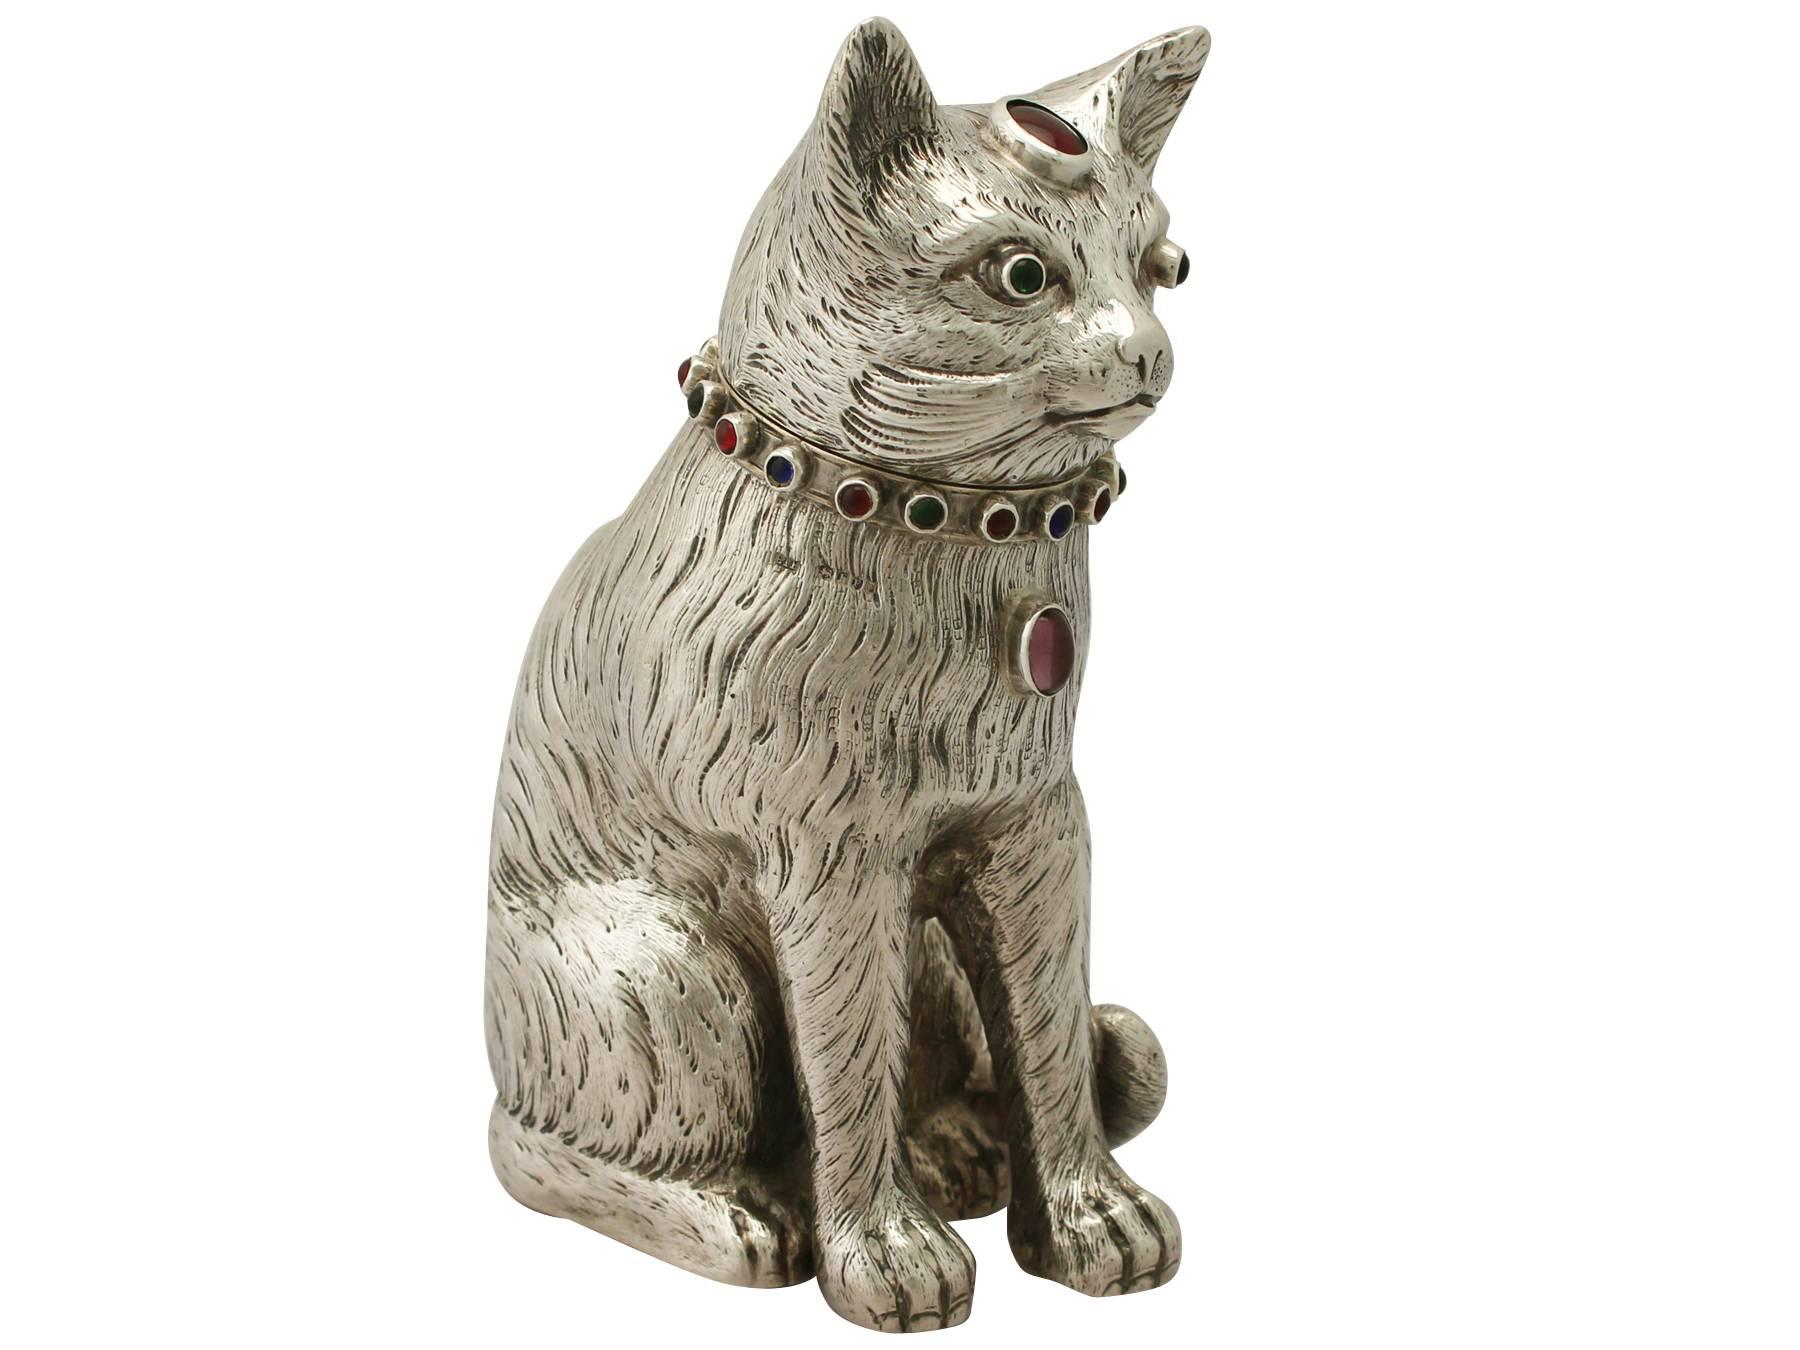 An exceptional, fine and impressive antique Edwardian sterling silver sugar box modelled in the form of a cat; an addition to our silver teaware collection.

This exceptional antique Edwardian sterling silver sugar box has been realistically